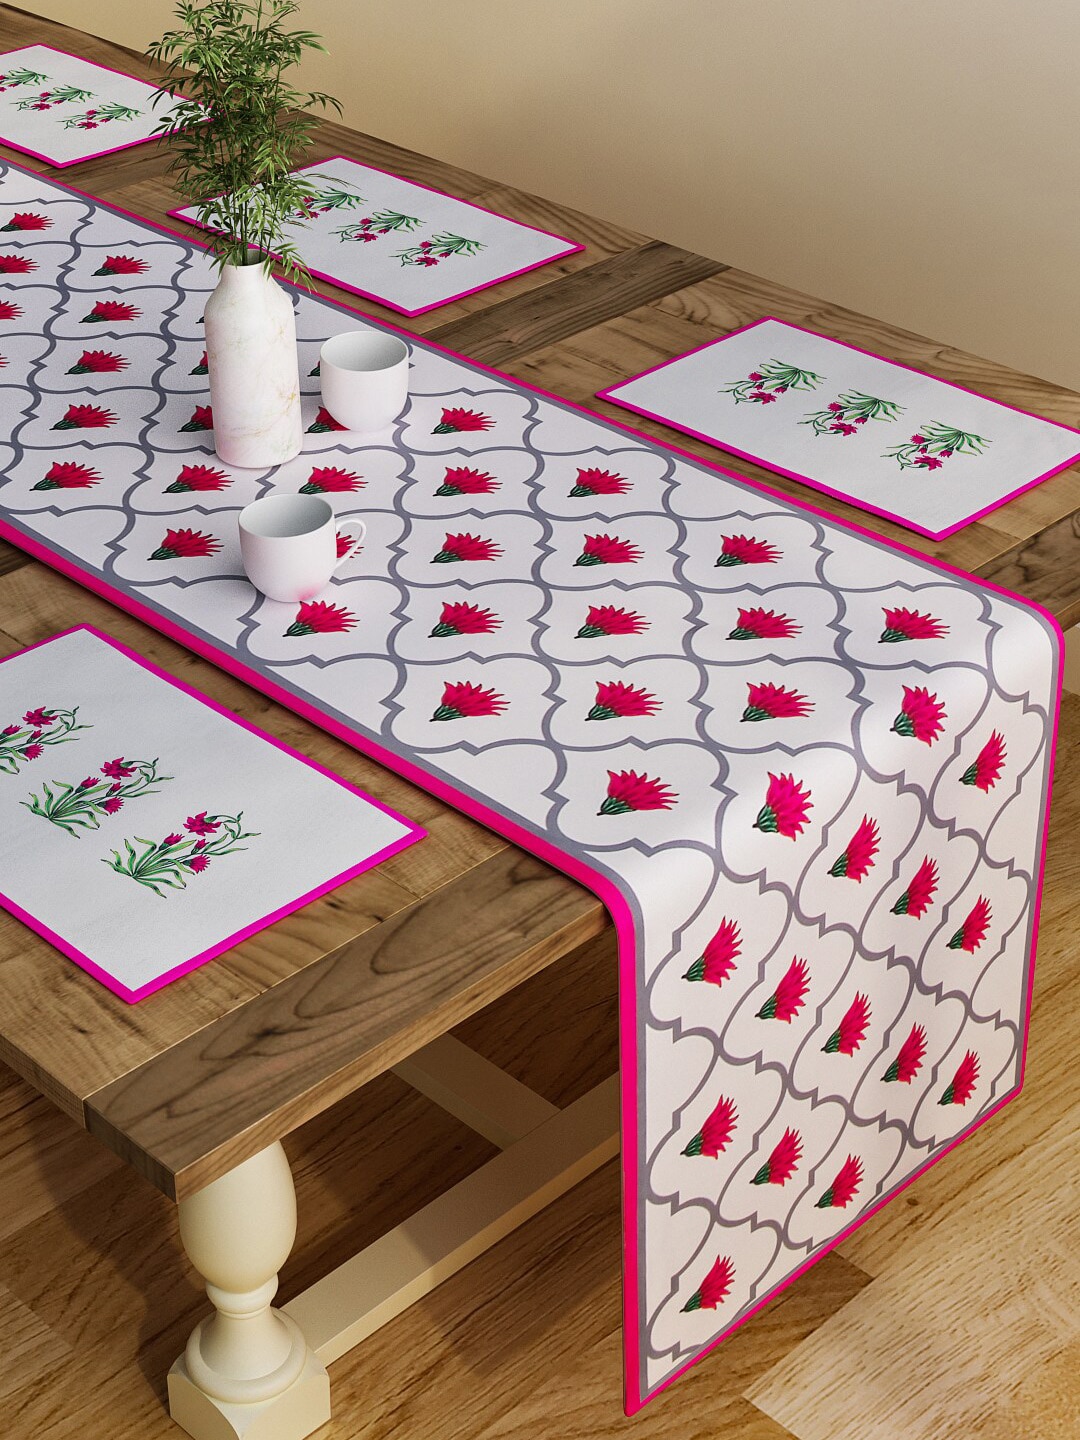 SEJ by Nisha Gupta Pink & White Set of 7 Table Placemats & Runner Price in India